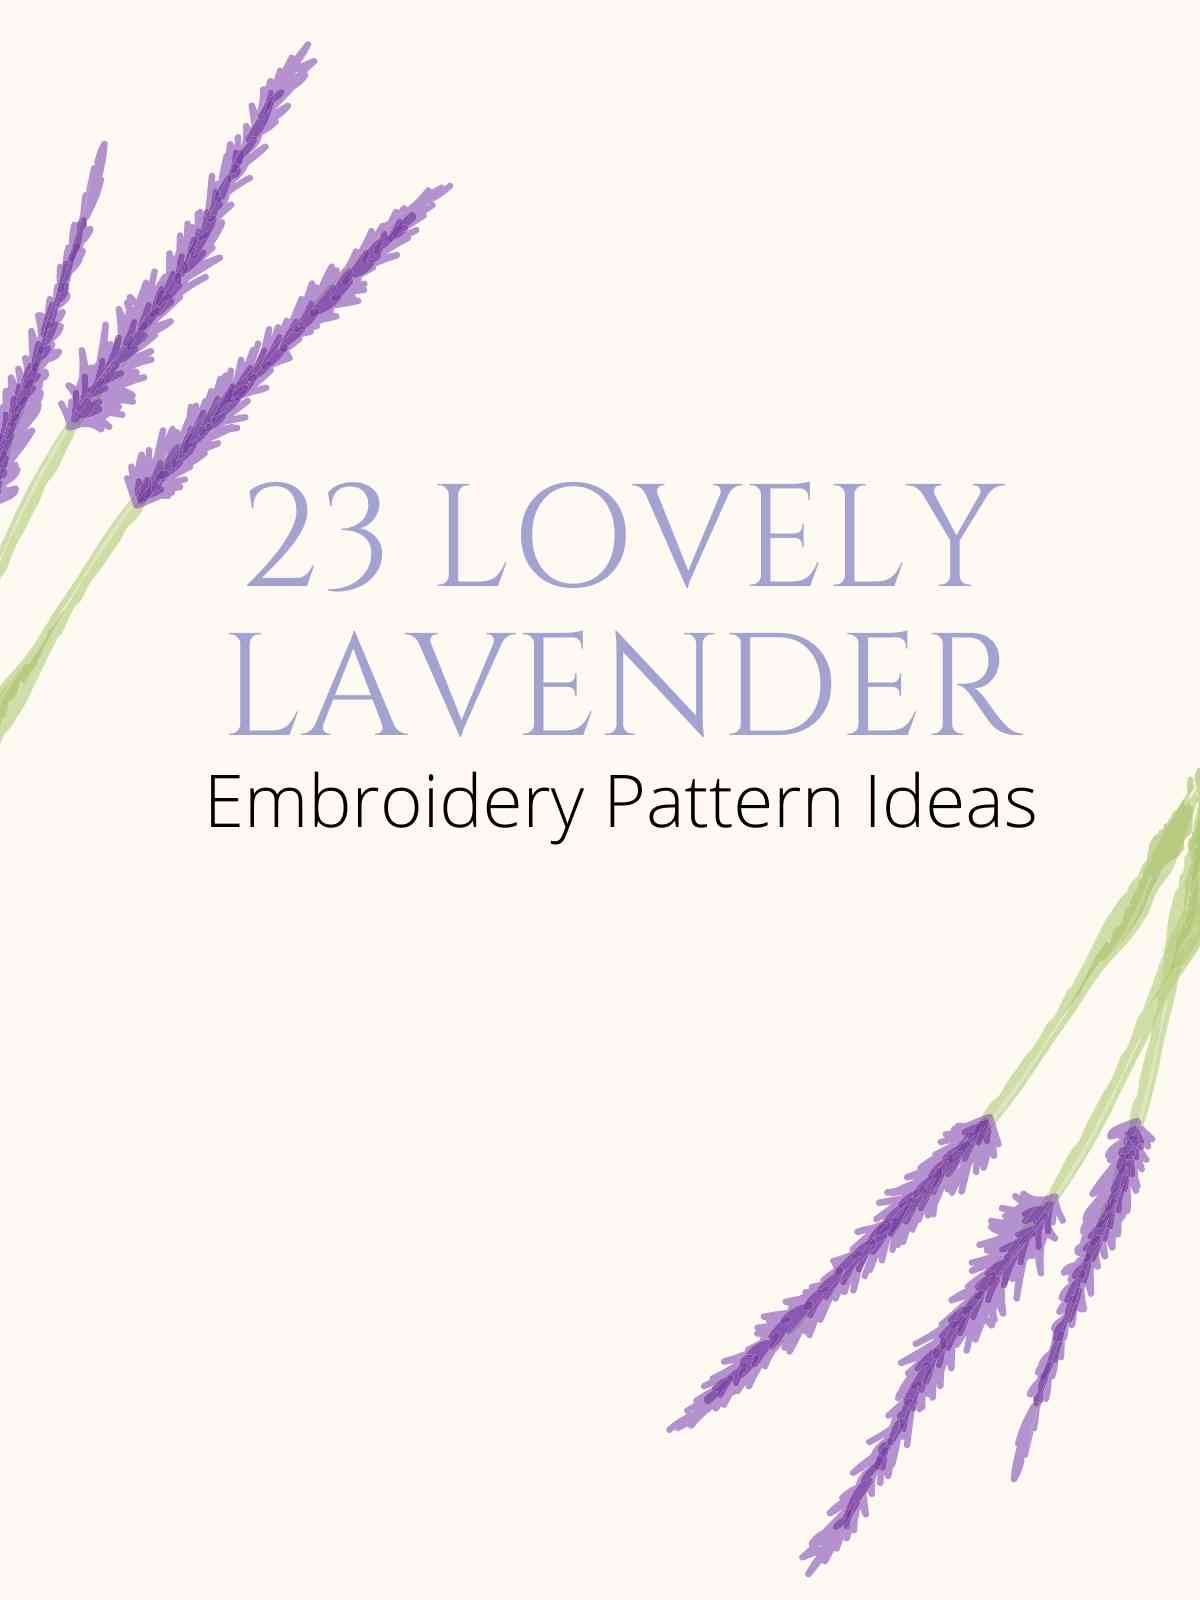 Lavender embroidery pattern ideas